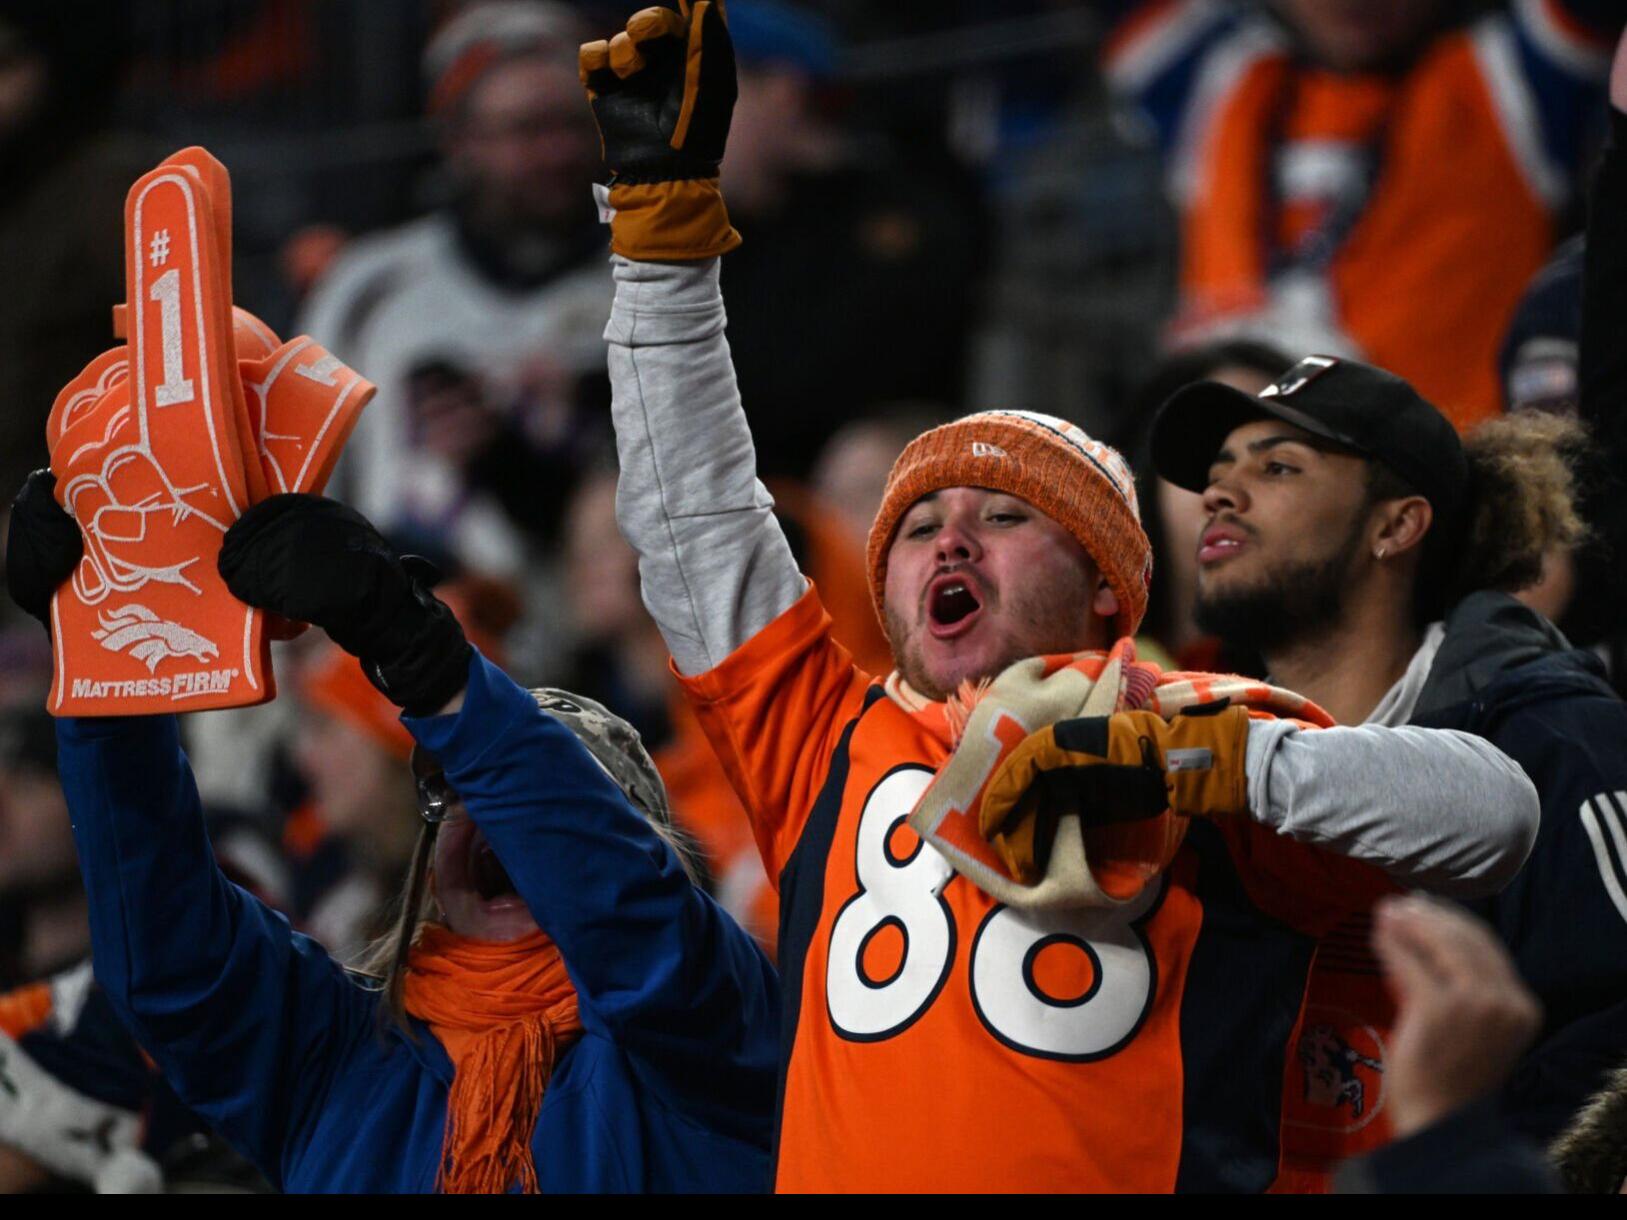 Broncos to put limited number of half-price tickets on sale